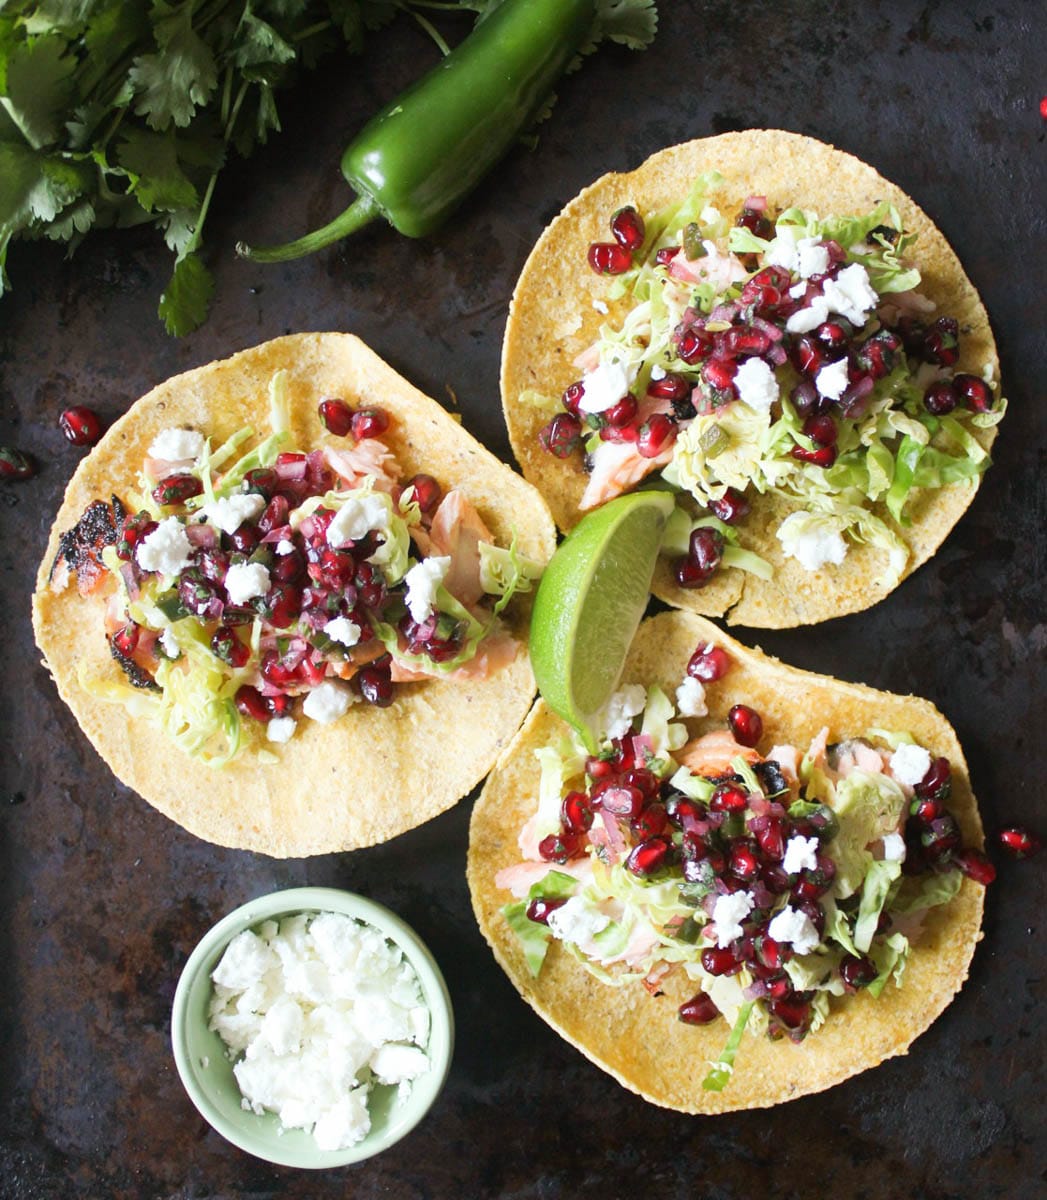 Grilled-Salmon-Tacos-with-Pomegranate-Jalapeno-Salsa-with-Brussels-Sprouts-and-Goat-Cheese-4